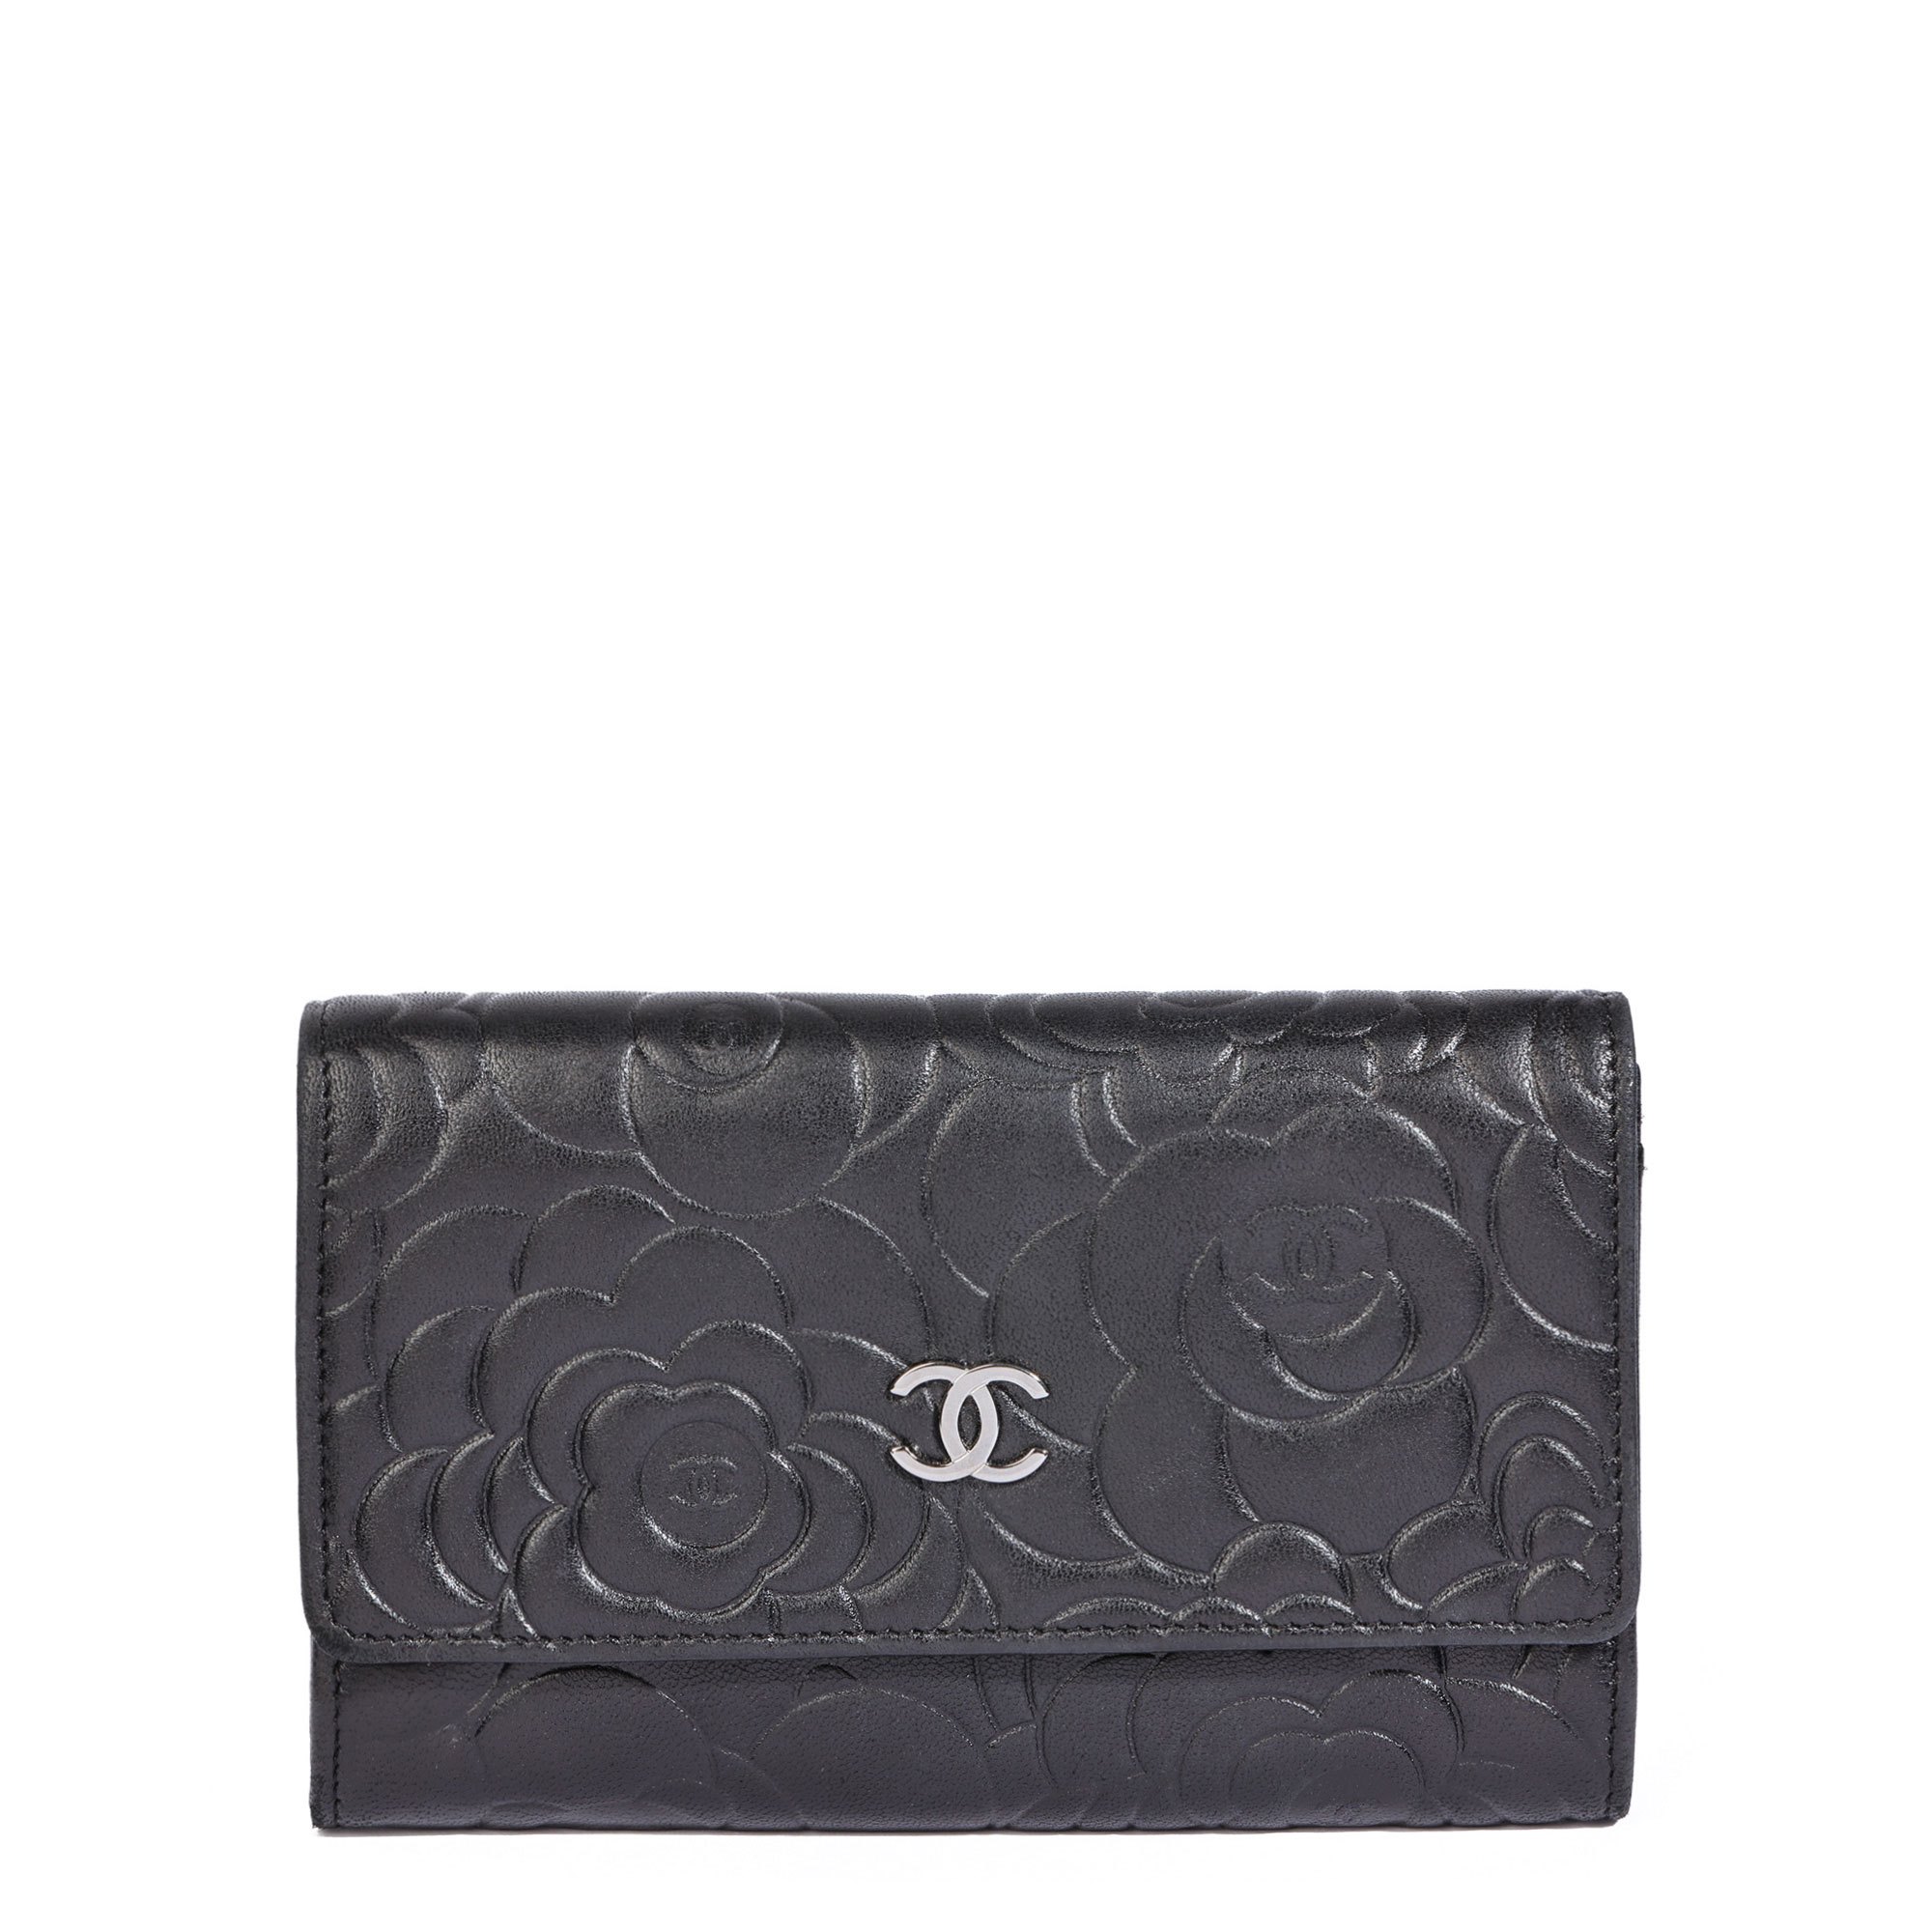 Chanel Camellia Flap Wallet 2016 AA0107 | Second Hand Accessories